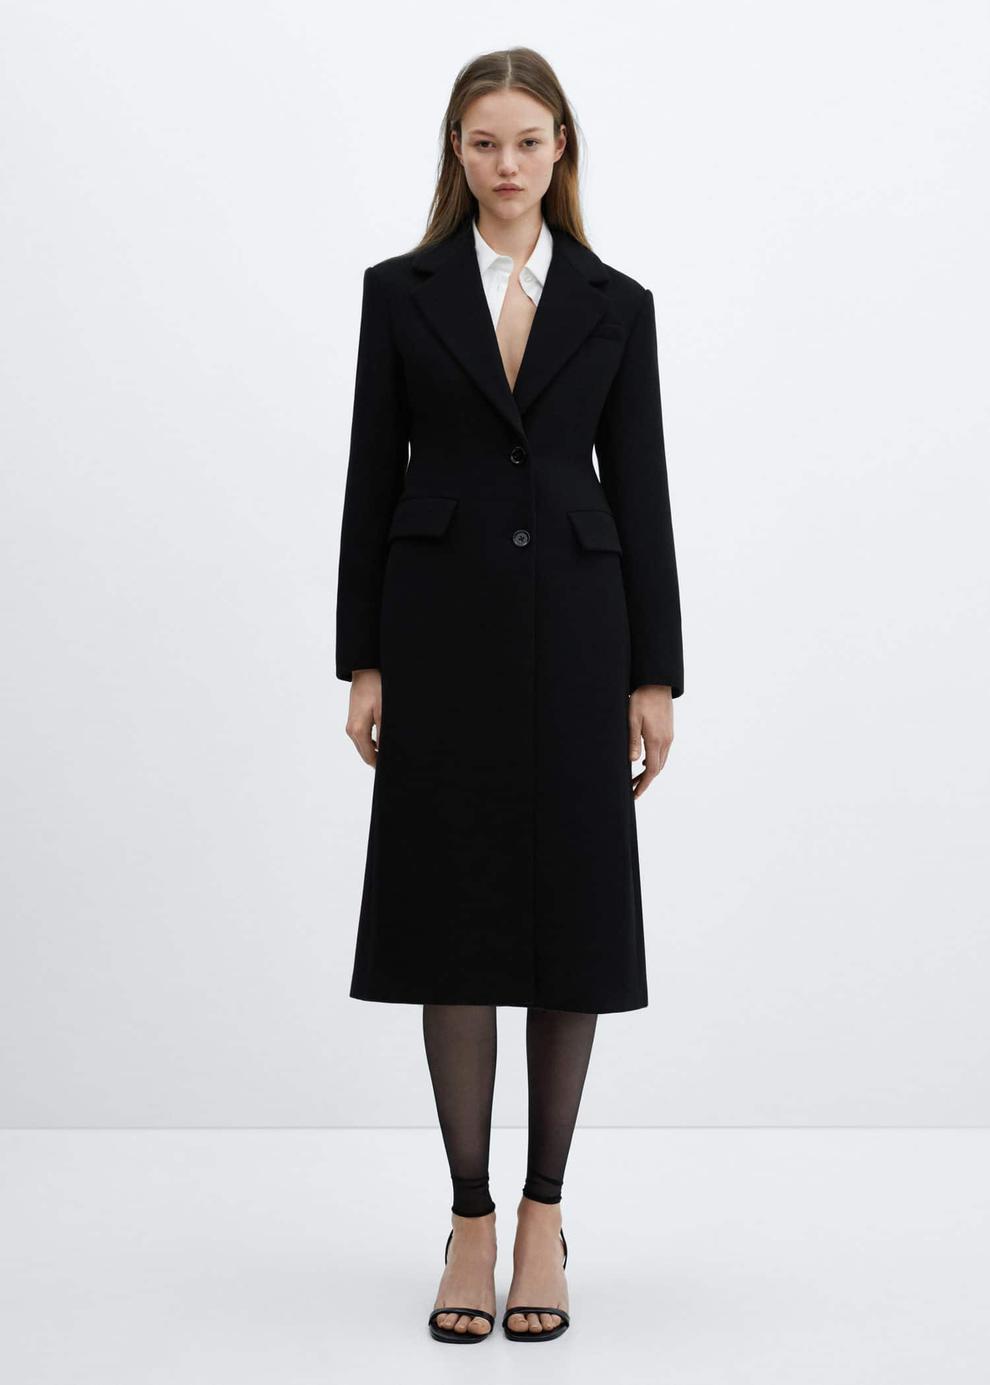 Tailored wool coat offers at £79.99 in MANGO